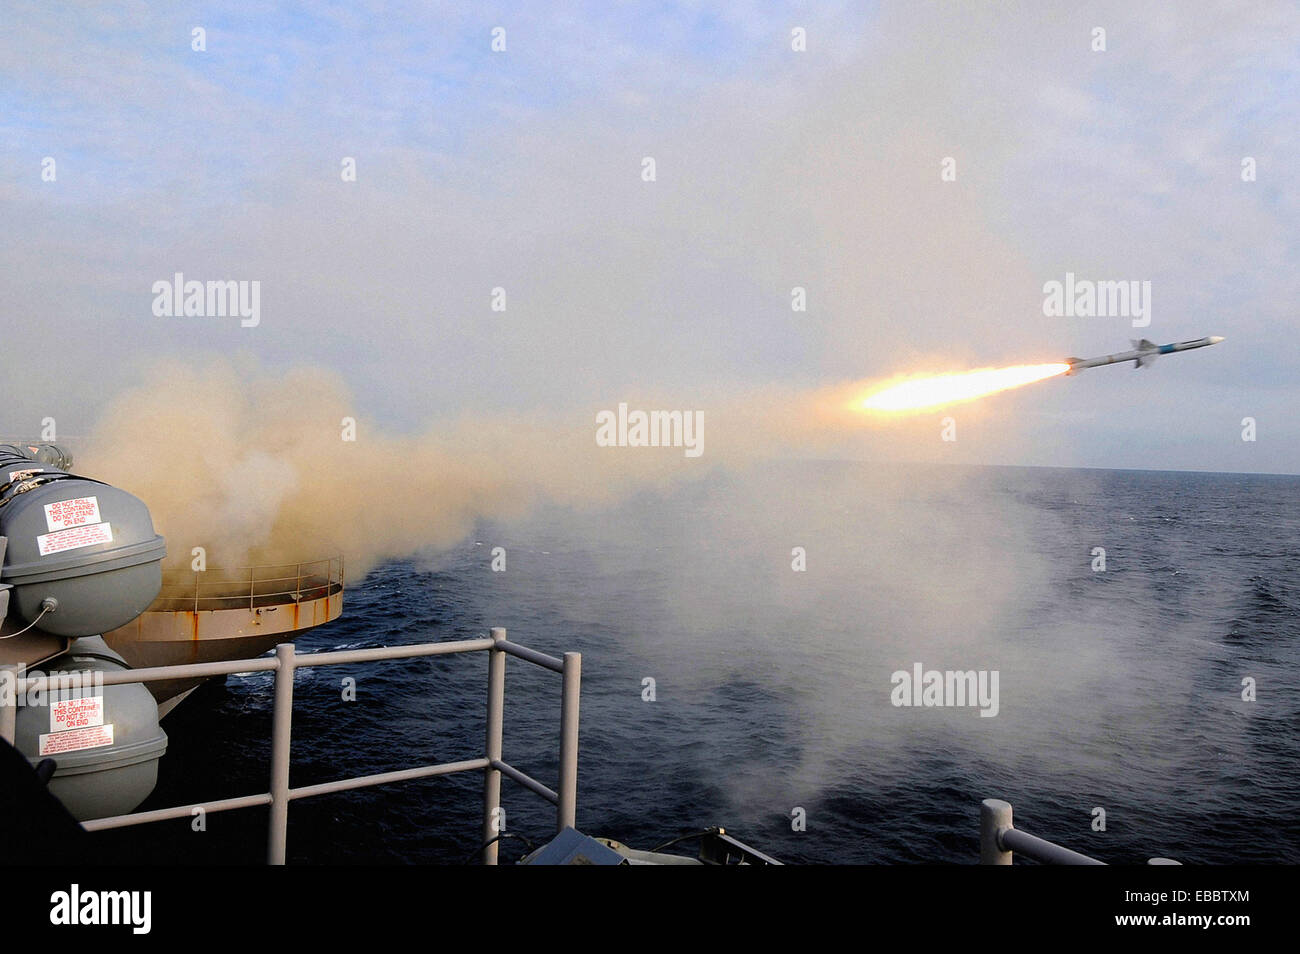 ATLANTIC OCEAN (Nov. 20, 2008) A NATO Sea Sparrow missile is launched during a live-fire missile exercise aboard the Stock Photo